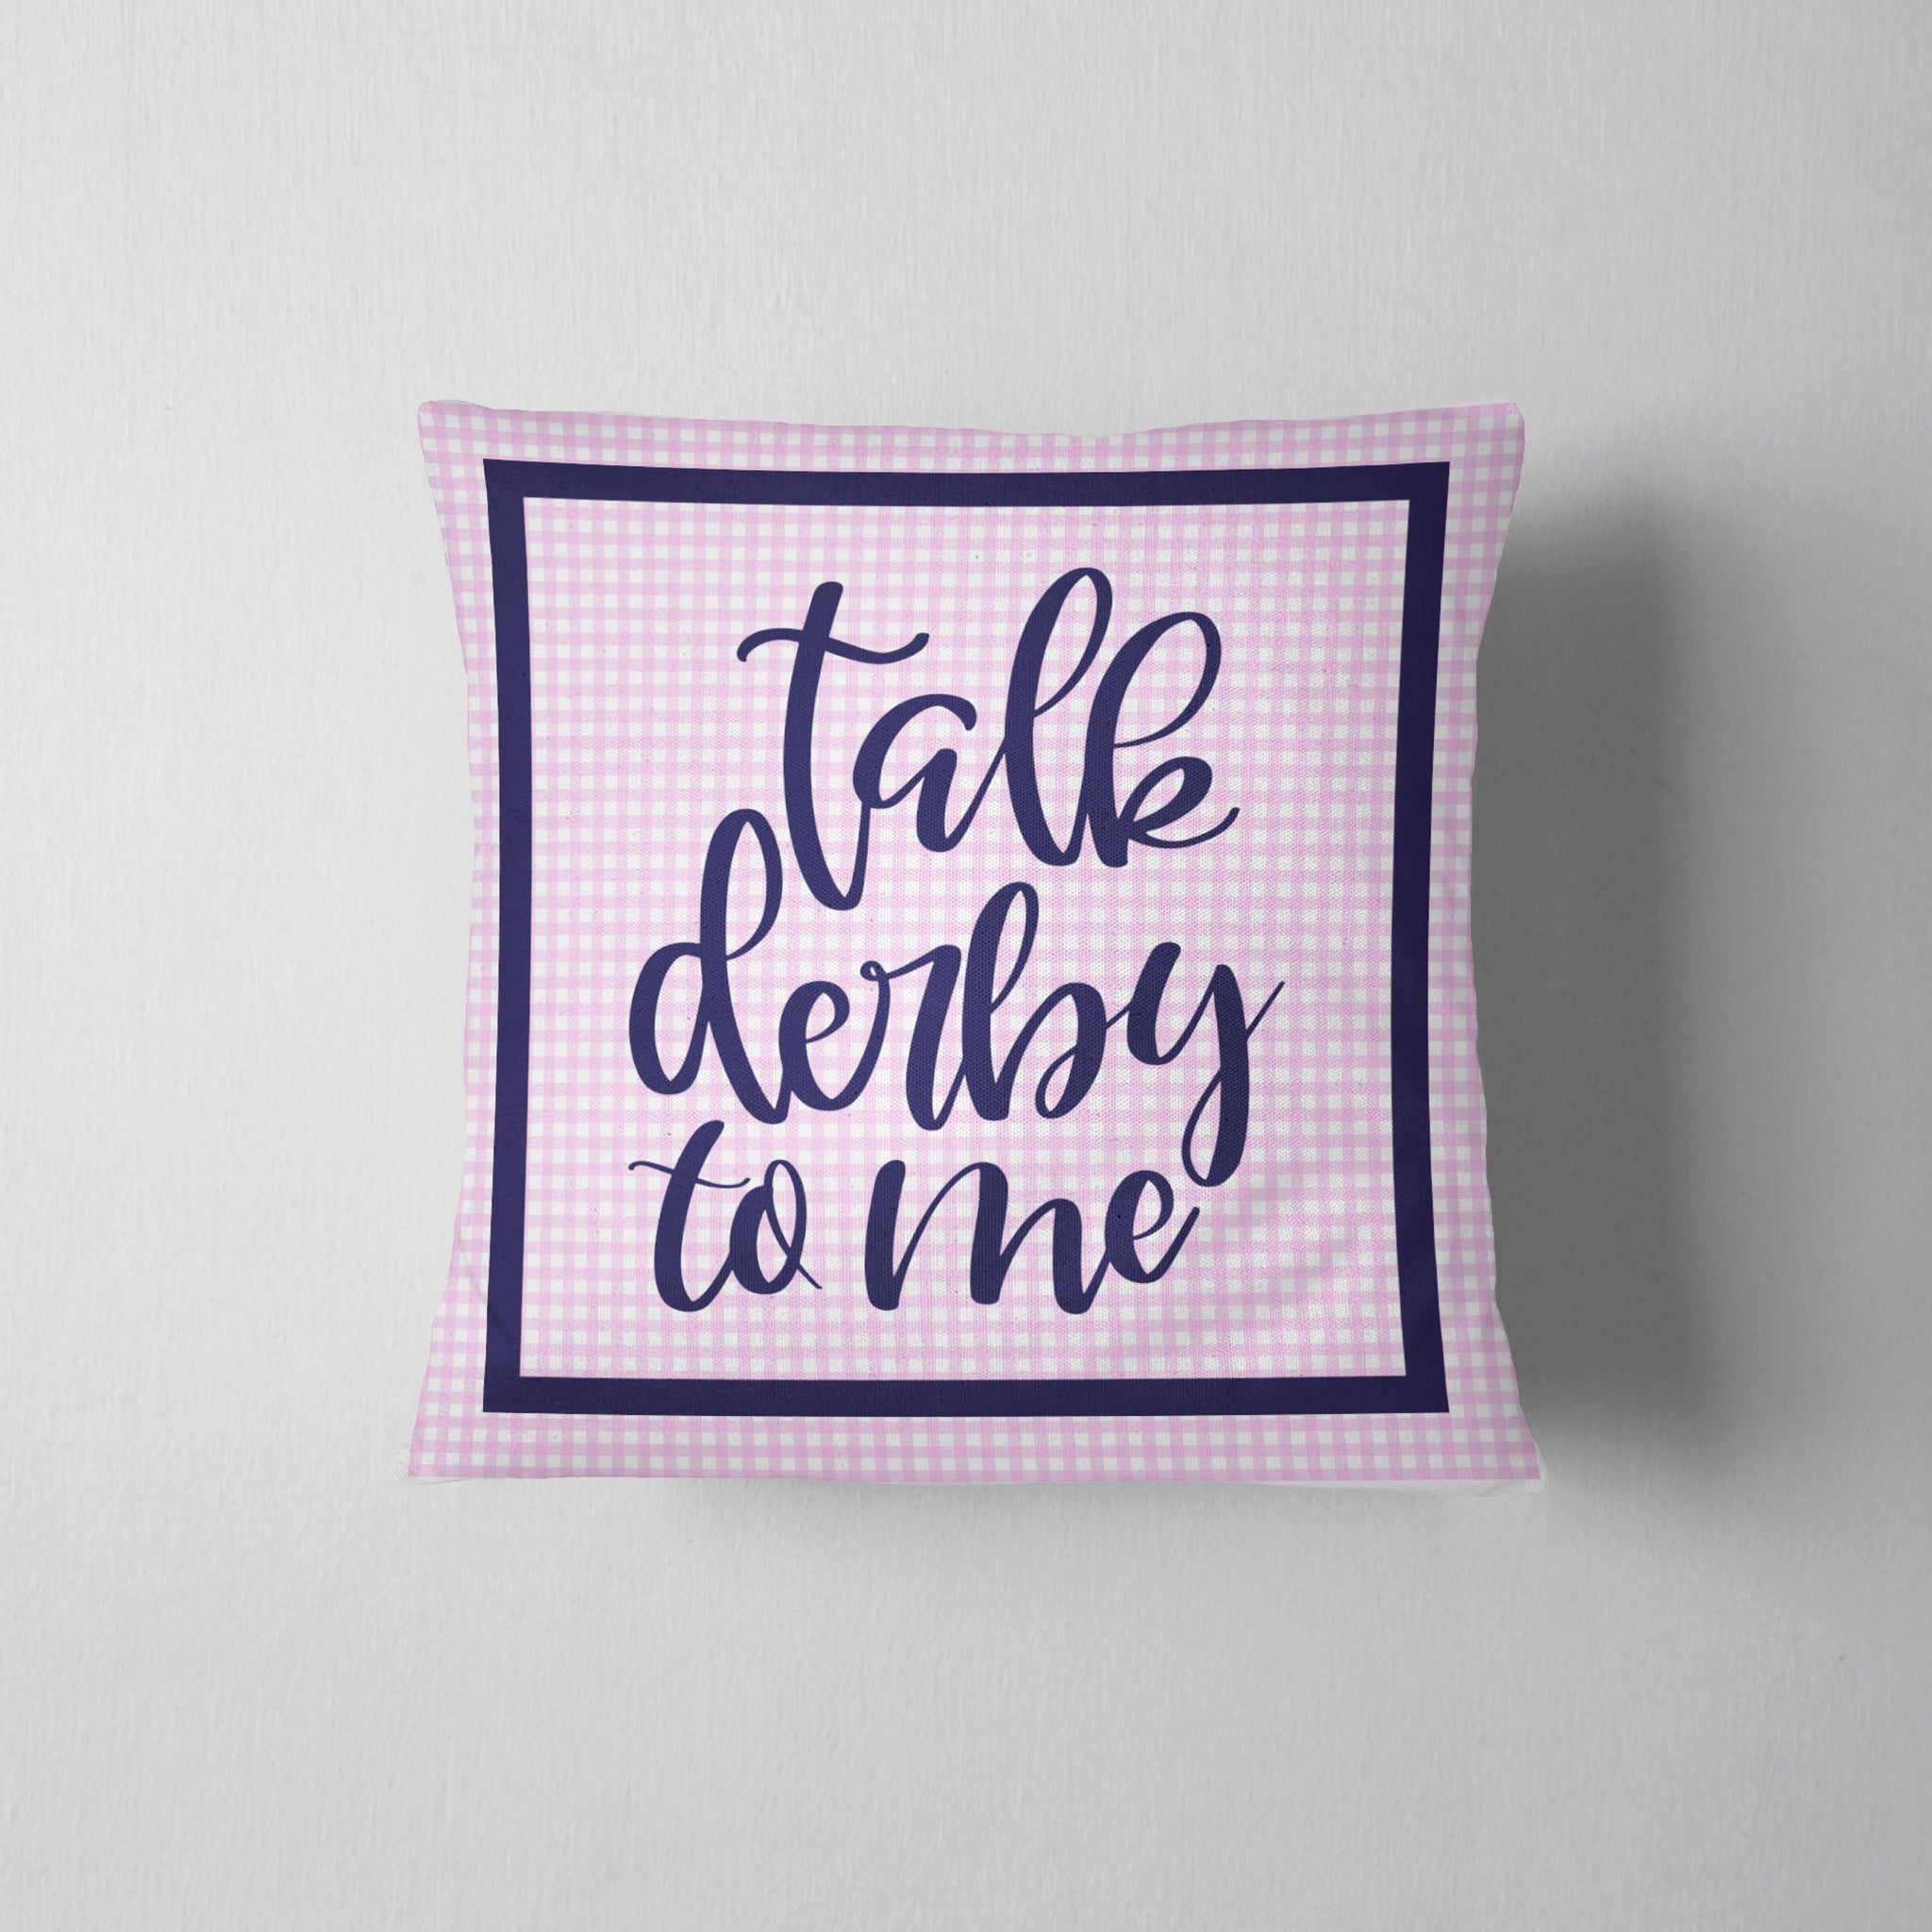 Talk Derby To Me Pillow